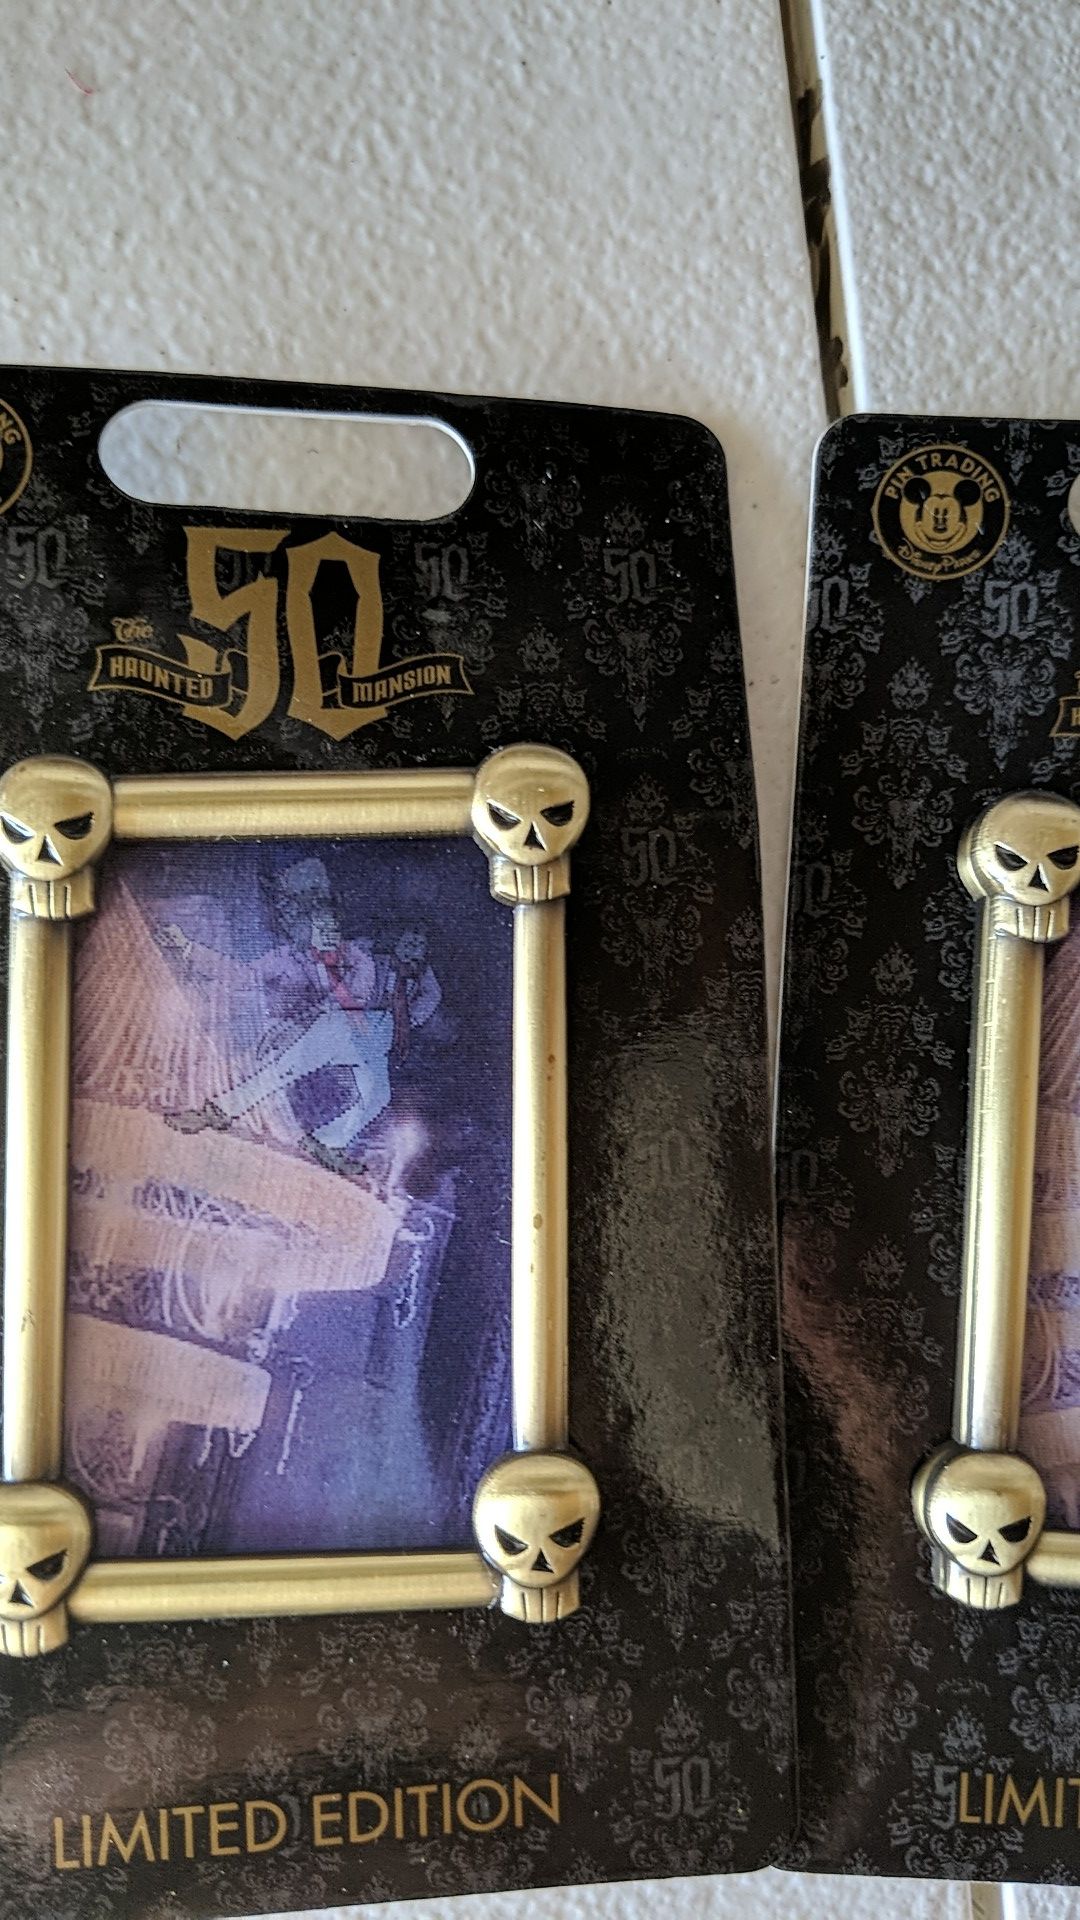 Disney haunted Mansion limited edition pin 15$each